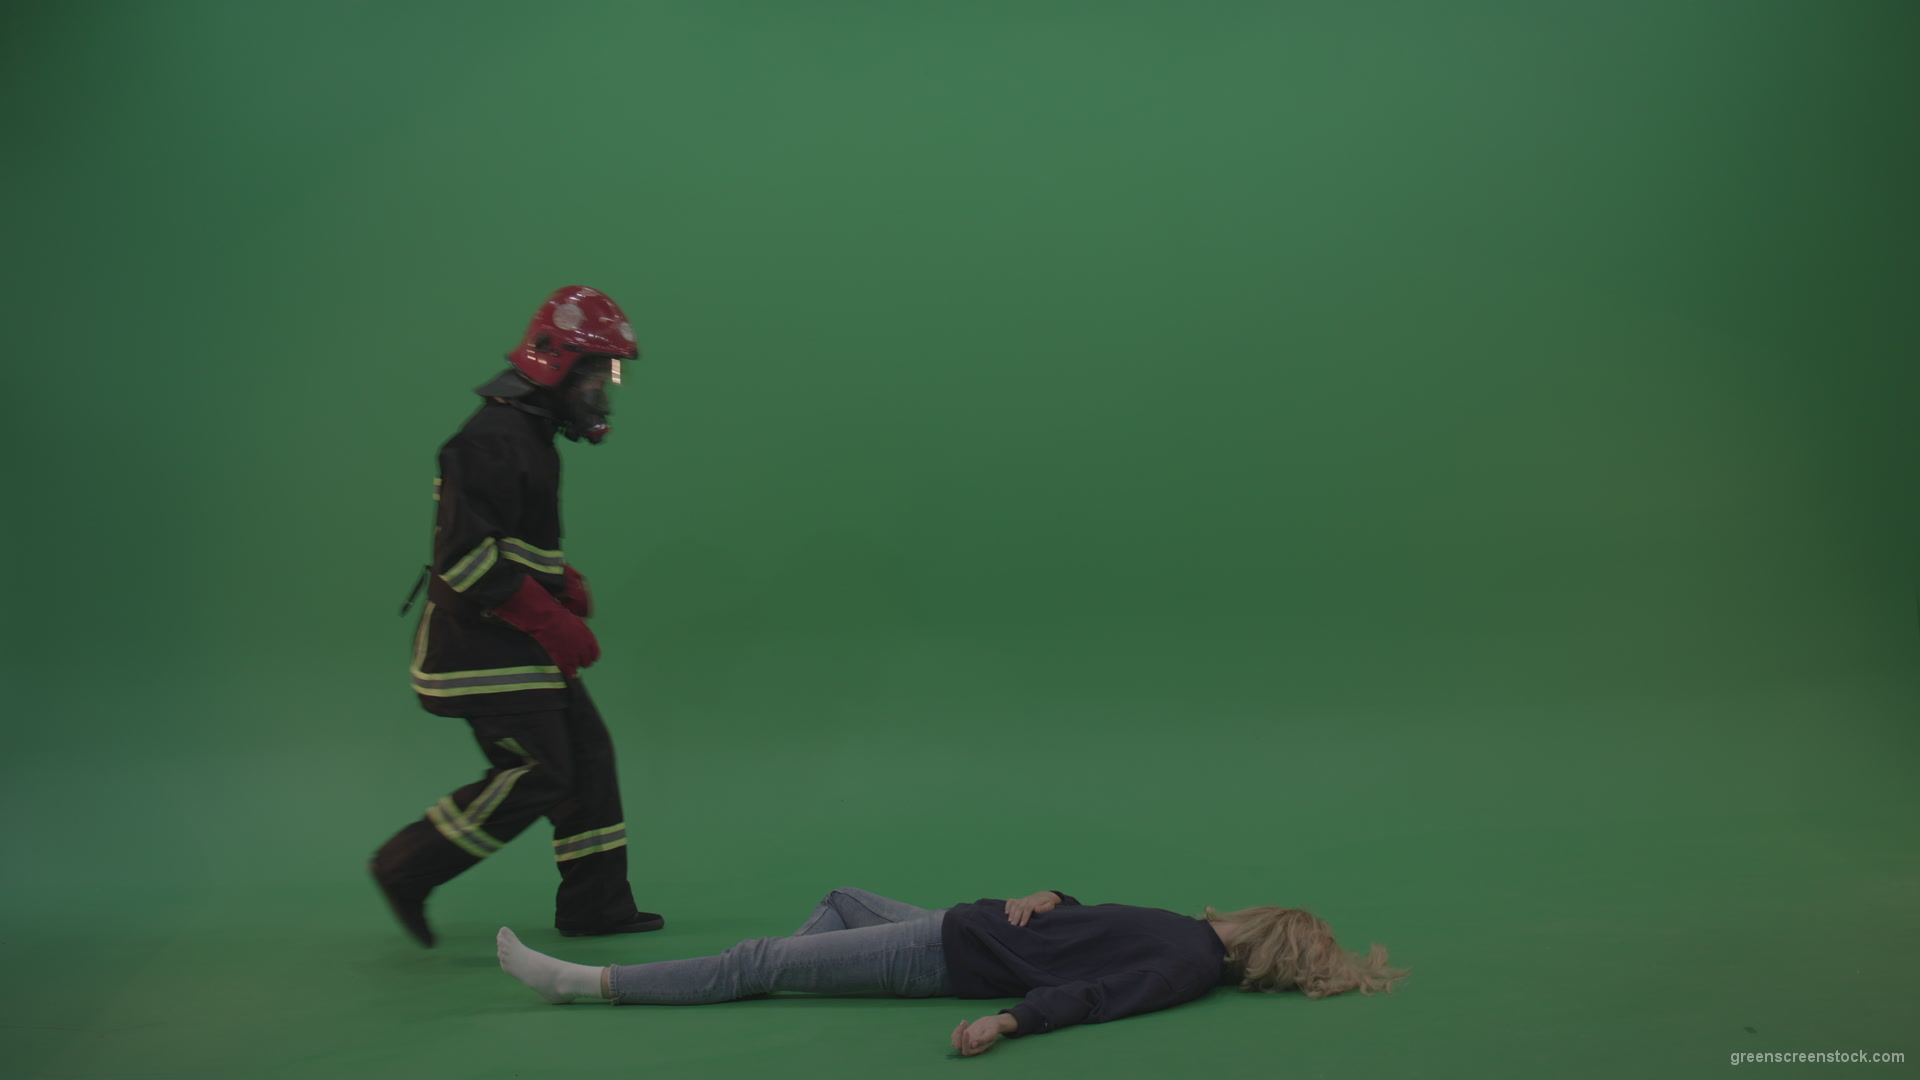 vj video background Brave_Fireman_Runs_To_Unconscious_Young_Victim_Girl_Slightly_Wakes_Her_Up_Takes_On_Strong_Hands_And_Carries_Towards_Safety_On_Green_Screen_Wall_Background_003